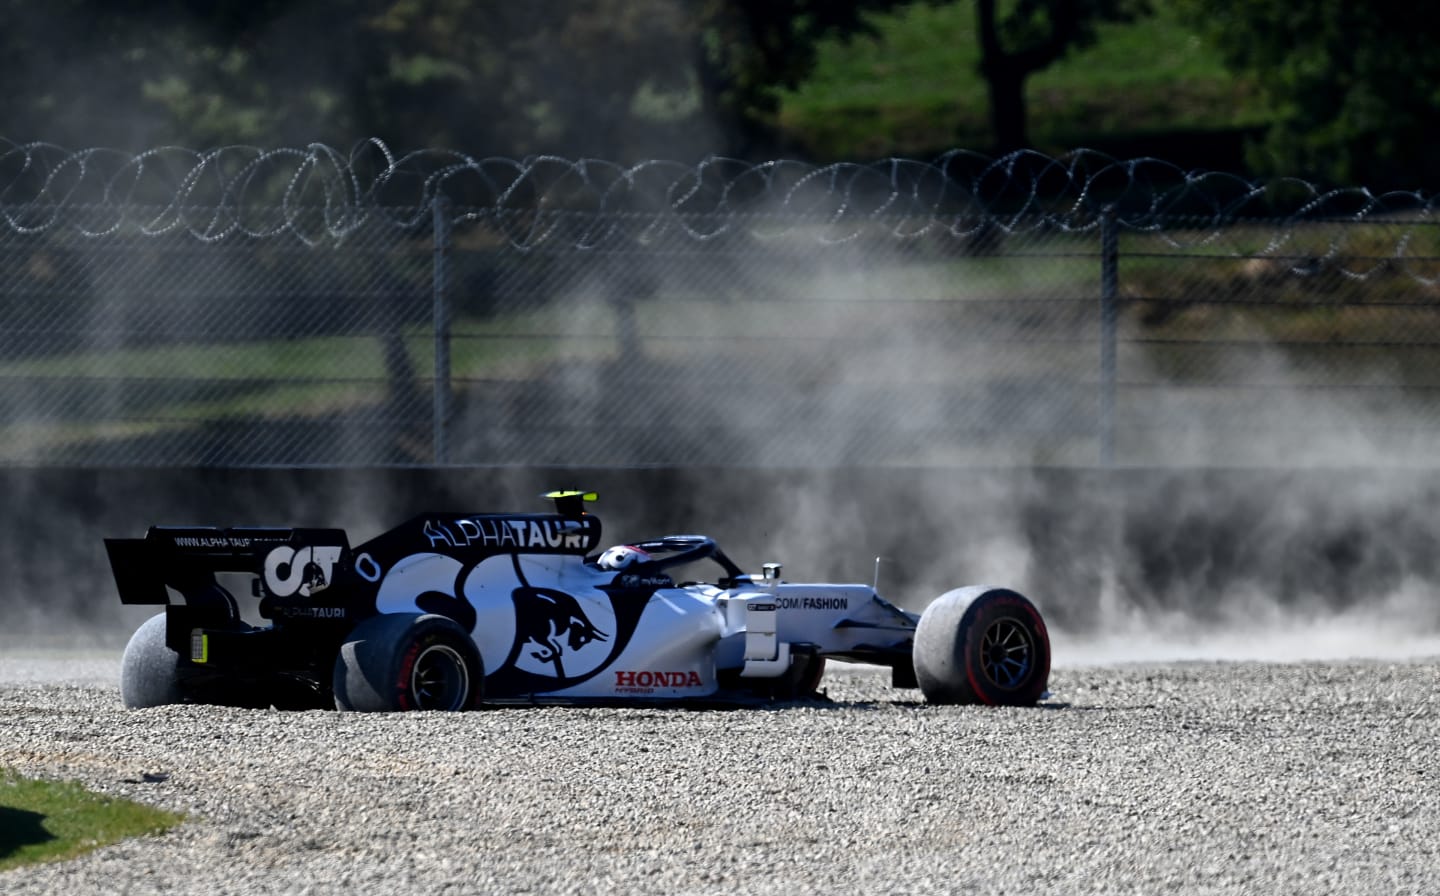 SCARPERIA, ITALY - SEPTEMBER 13: Pierre Gasly of France driving the (10) Scuderia AlphaTauri AT01 Honda stops in the gravel after a crash at the start during the F1 Grand Prix of Tuscany at Mugello Circuit on September 13, 2020 in Scarperia, Italy. (Photo by Clive Mason - Formula 1/Formula 1 via Getty Images)